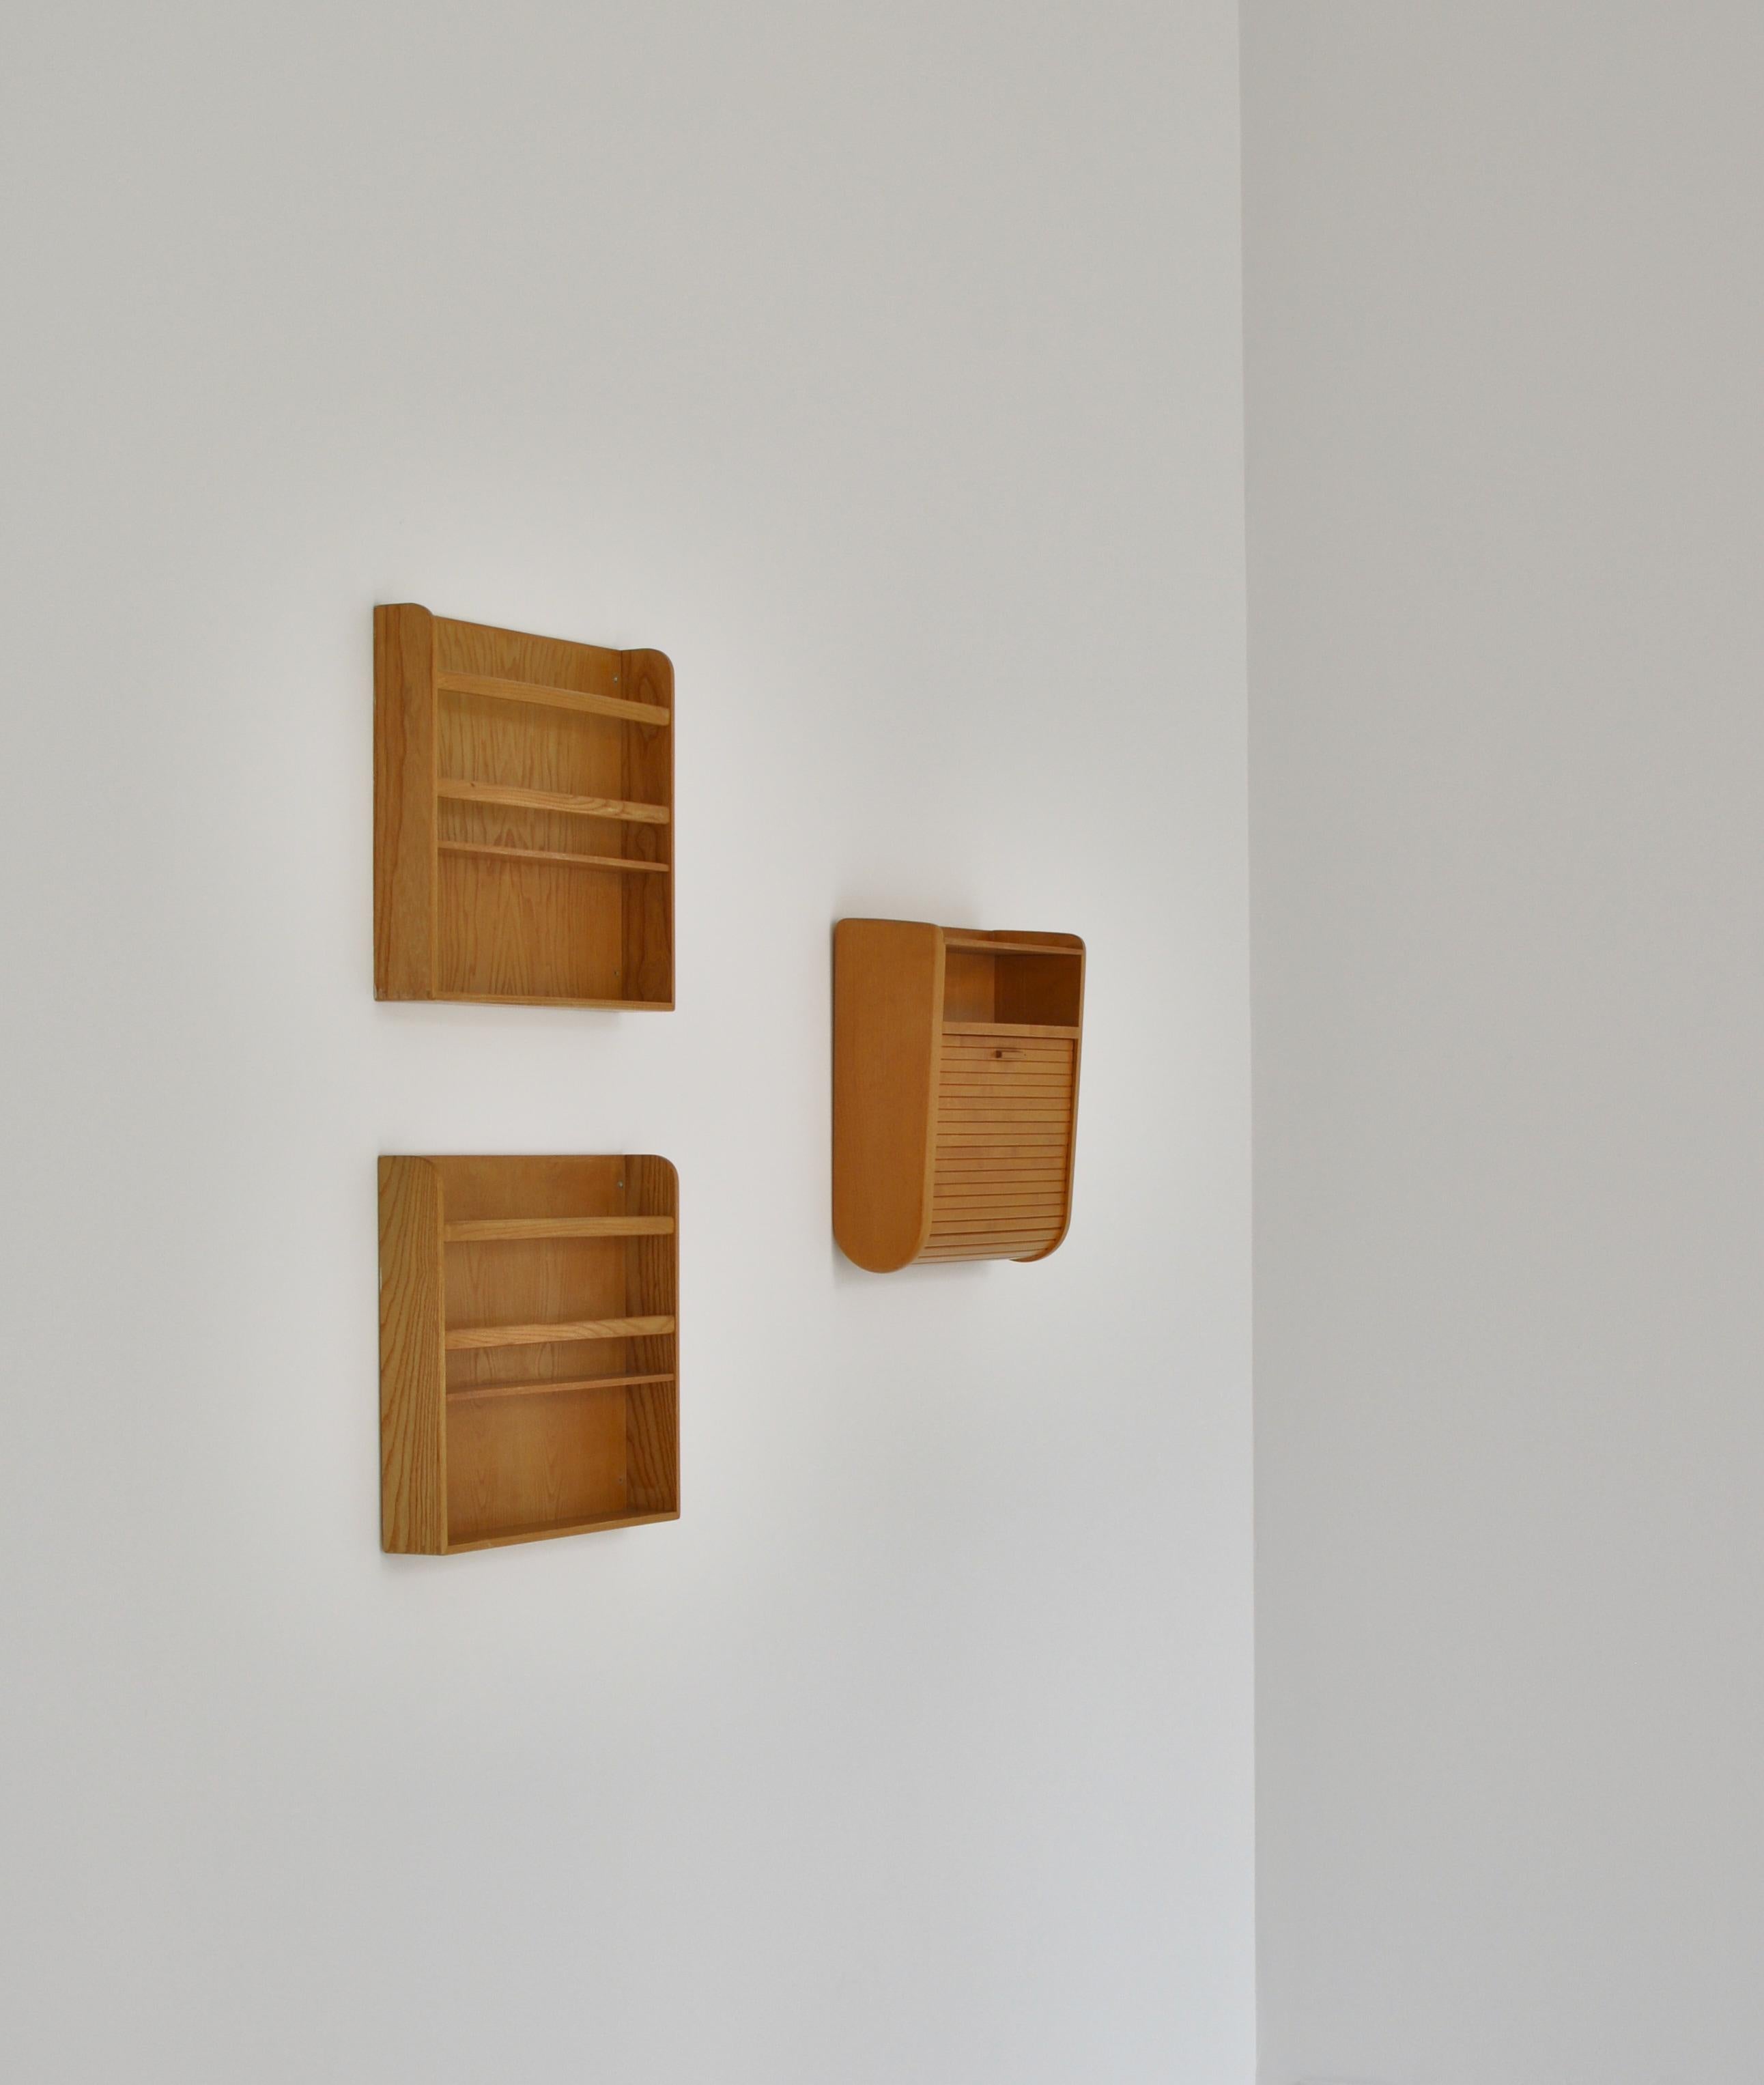 Small wall mounted tambour cabinet of maple and a pair of wall mounted book shelves of elm. Unique. Designed and made approx. 1933–1940 by cabinetmaker Gustav Bertelsen.

Designed and made specifically for Tove & Edvard Kindt-Larsen's summer house